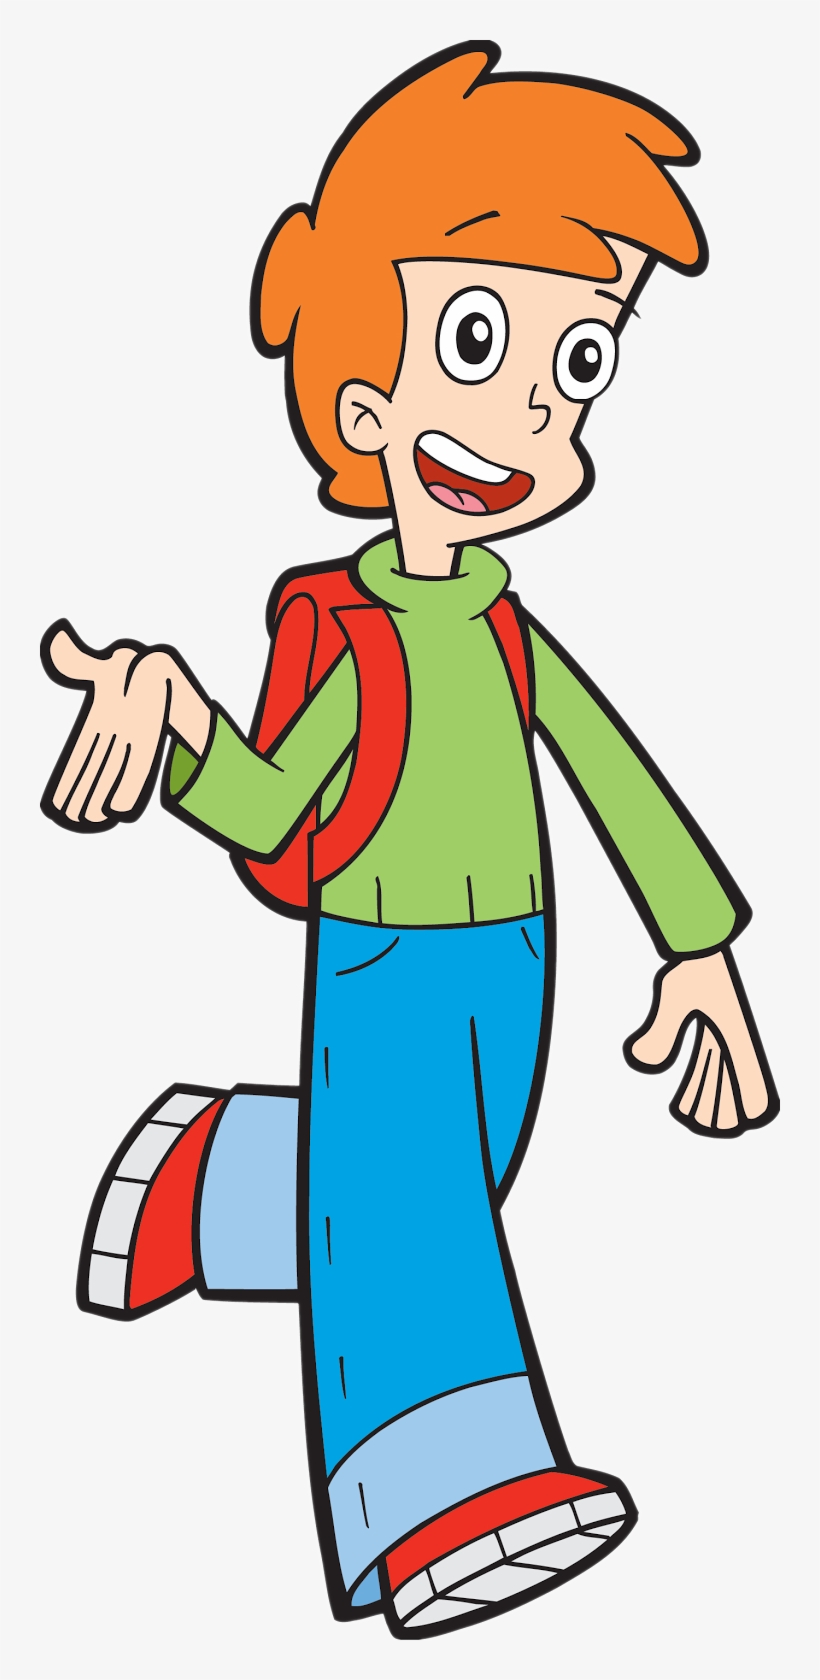 Go To Image - Cartoon Character Waving Png, transparent png #8115605